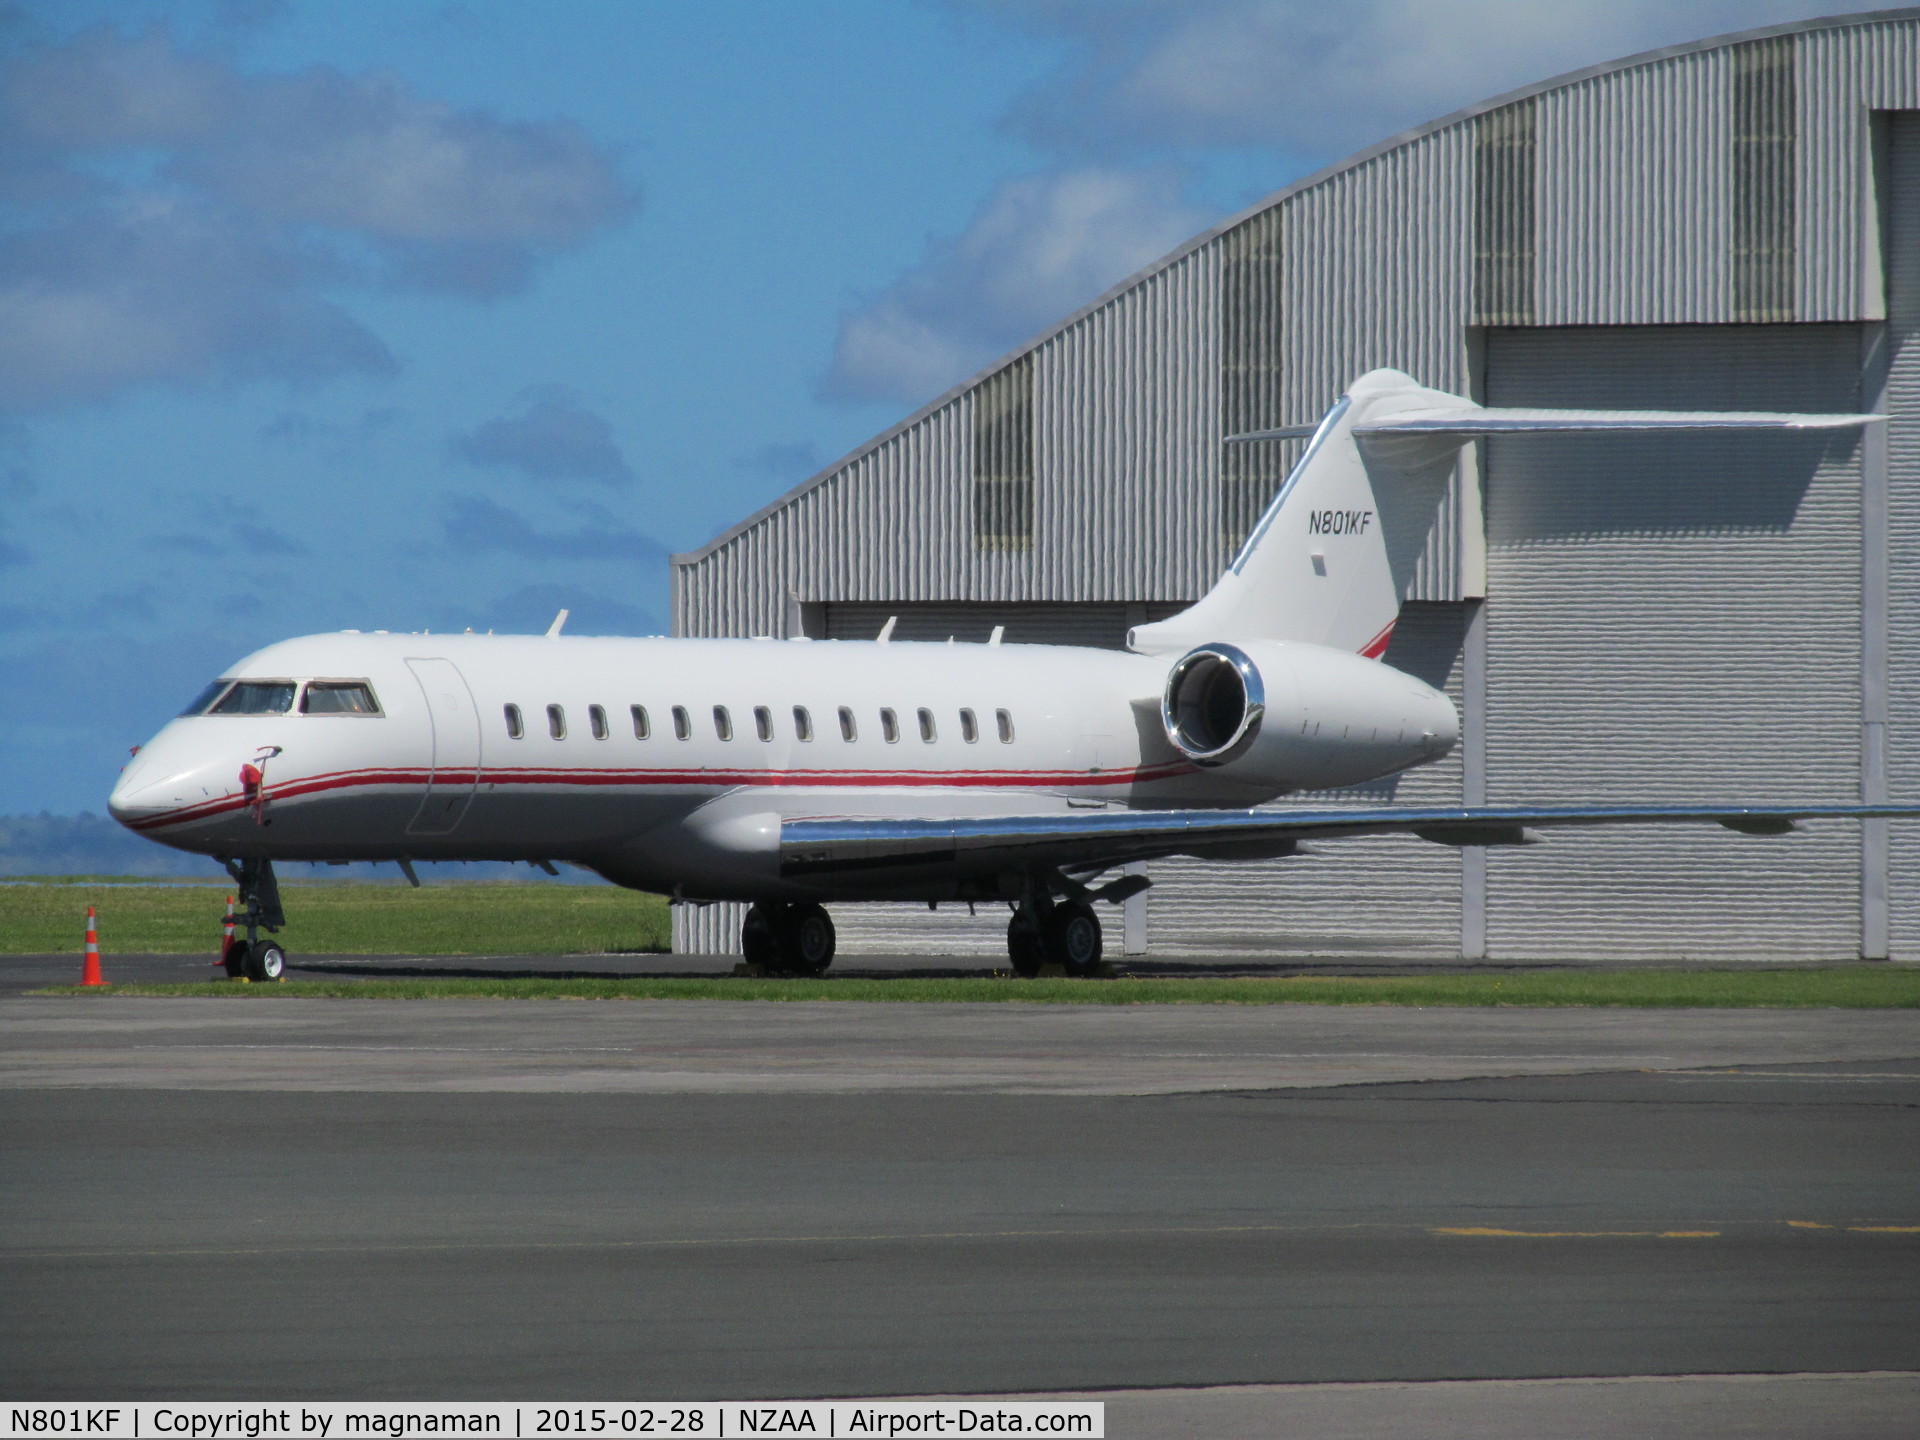 N801KF, 2000 Bombardier BD-700-1A10 Global Express C/N 9073, At NZAA for CWC2015 match - score at moment NZ 79-3 need 73 runs to win